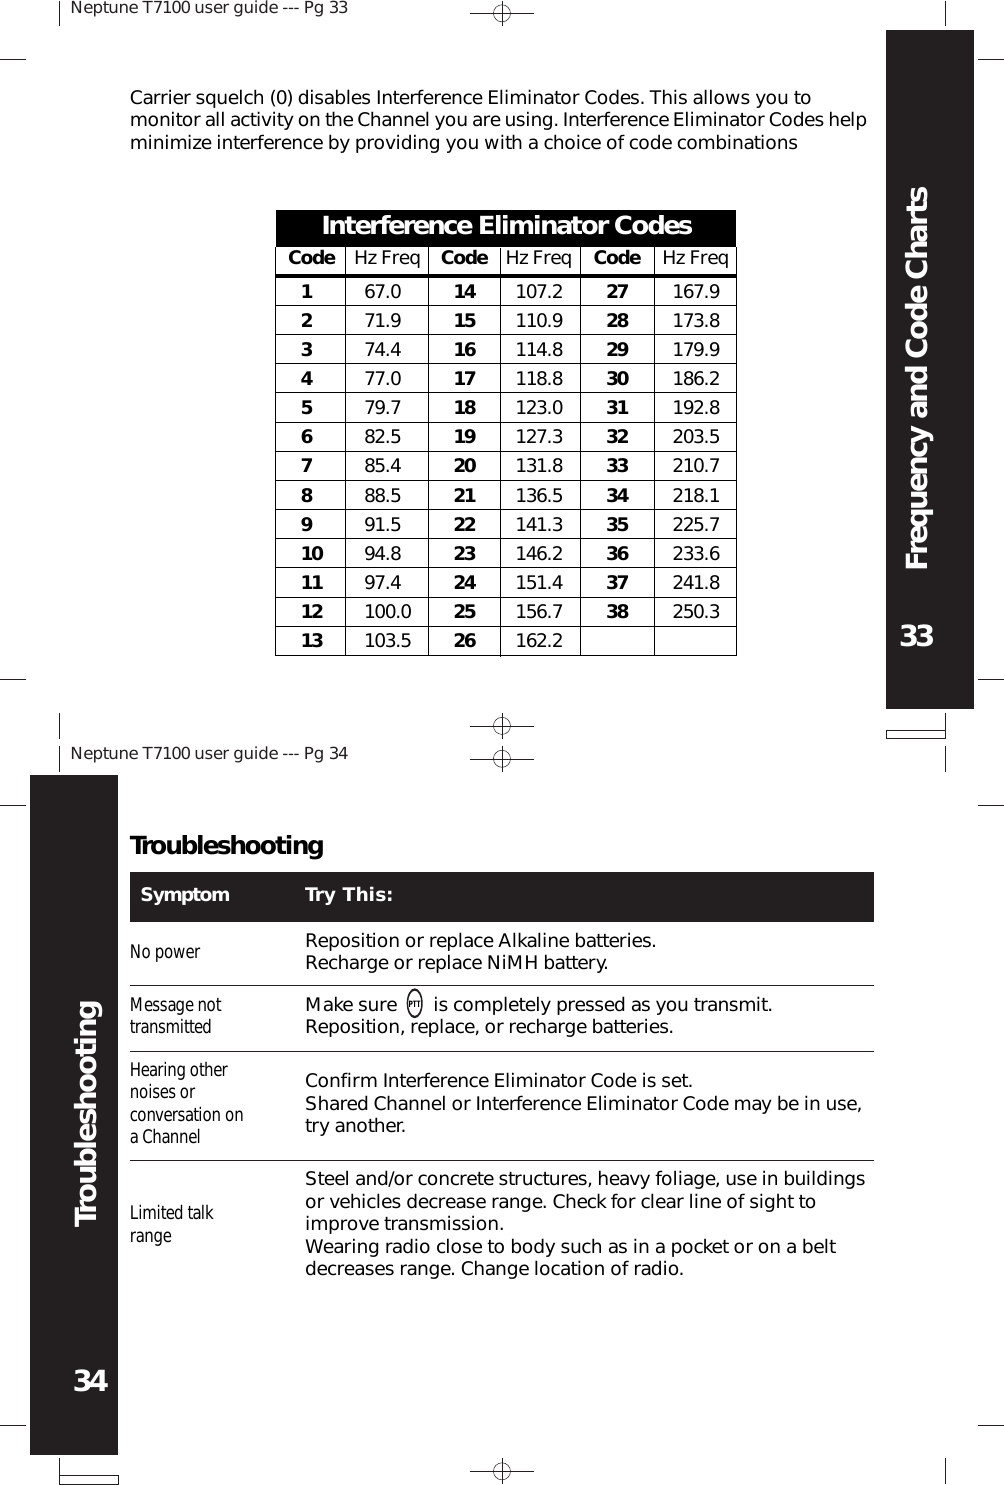 Neptune T7100 user guide --- Pg 3333Neptune T7100 user guide --- Pg 3434TroubleshootingFrequency and Code ChartsTroubleshootingSymptom Try This:No powerMessage nottransmittedHearing othernoises orconversation ona ChannelReposition or replace Alkaline batteries.Recharge or replace NiMH battery.Make sure       is completely pressed as you transmit.Reposition, replace, or recharge batteries.Confirm Interference Eliminator Code is set.Shared Channel or Interference Eliminator Code may be in use,try another.Limited talkrangeSteel and/or concrete structures, heavy foliage, use in buildingsor vehicles decrease range. Check for clear line of sight toimprove transmission.Wearing radio close to body such as in a pocket or on a beltdecreases range. Change location of radio.Carrier squelch (0) disables Interference Eliminator Codes. This allows you tomonitor all activity on the Channel you are using. Interference Eliminator Codes helpminimize interference by providing you with a choice of code combinationsInterference Eliminator CodesCode Hz FreqCodeCode Hz FreqHz Freq123456789101112131415161718192021222324252627282930313233343536373867.071.974.477.079.782.585.488.591.594.897.4100.0103.5107.2110.9114.8118.8123.0127.3131.8136.5141.3146.2151.4156.7162.2167.9173.8179.9186.2192.8203.5210.7218.1225.7233.6241.8250.3